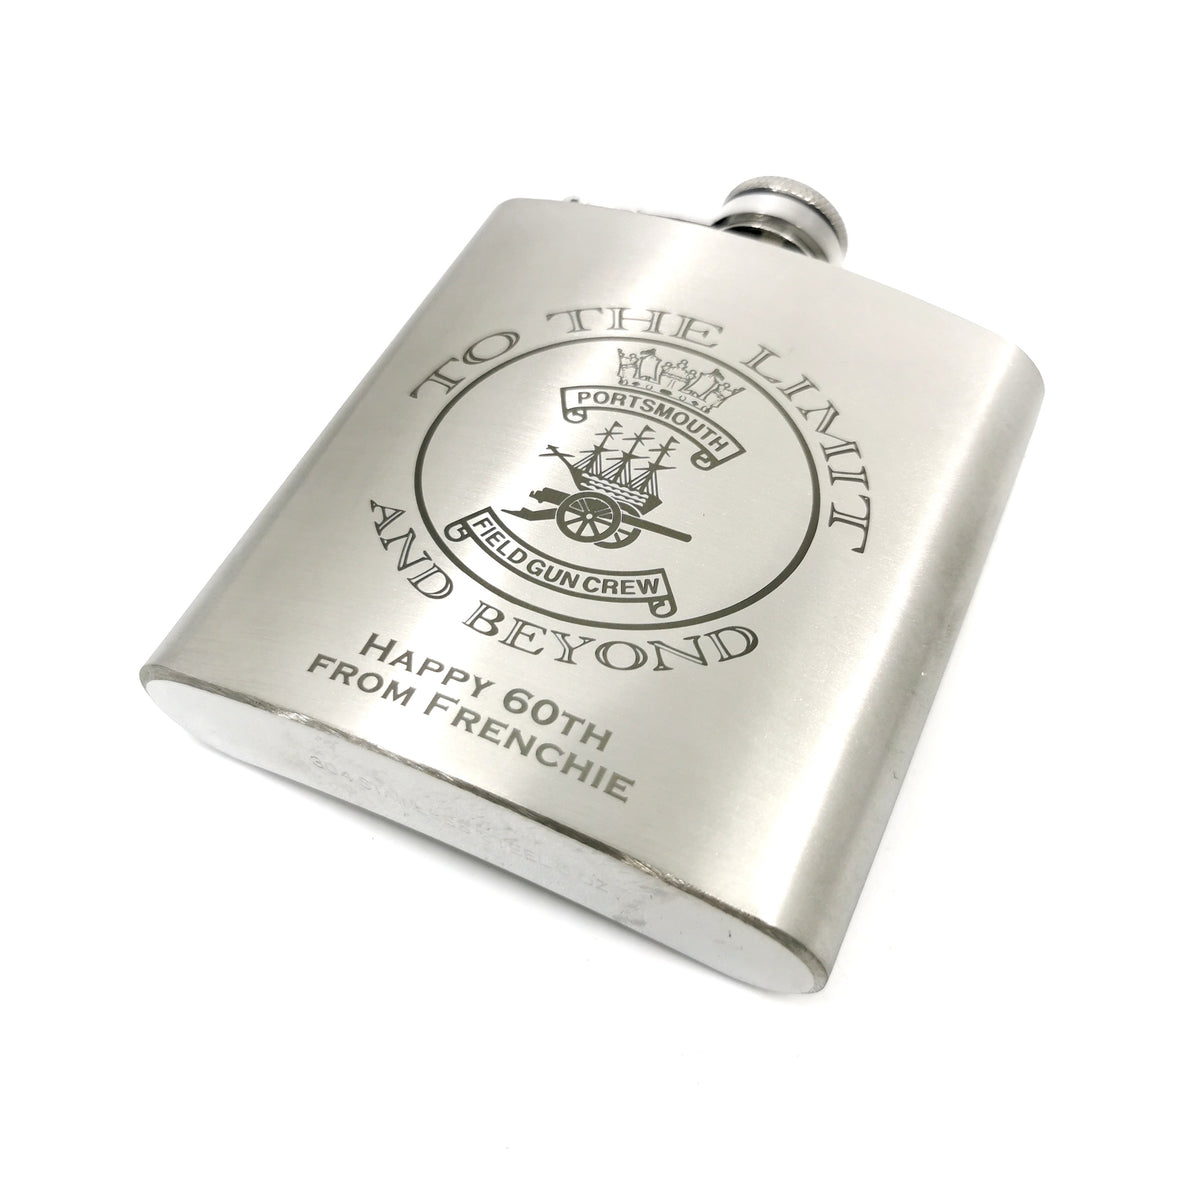 Brushed Steel Hip flask with tin gift box set